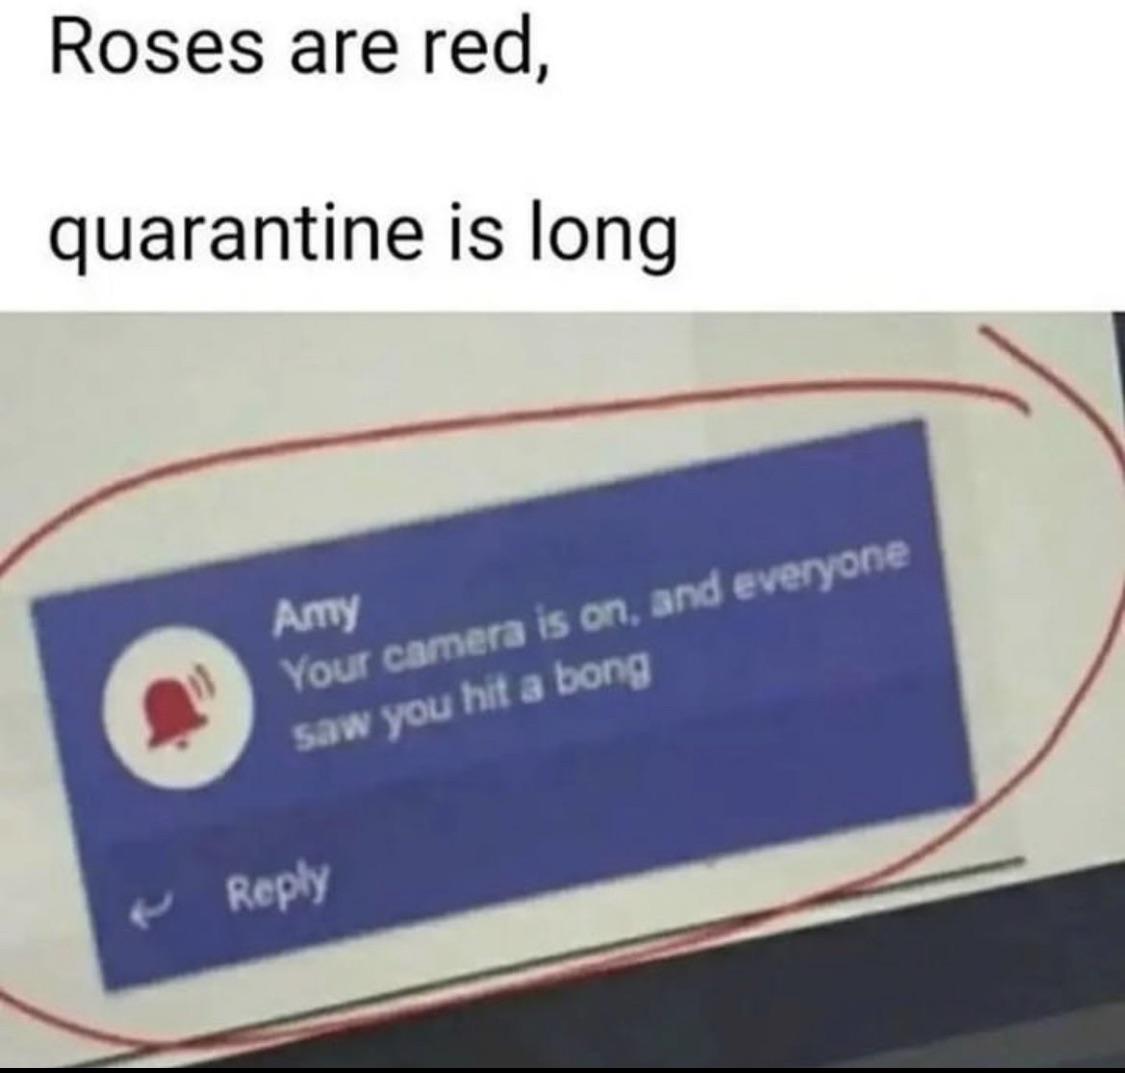 dank memes - roses are red quarantine is long your camera is on - Roses are red, quarantine is long Amy Your camera is on, and everyone saw you hit a bong